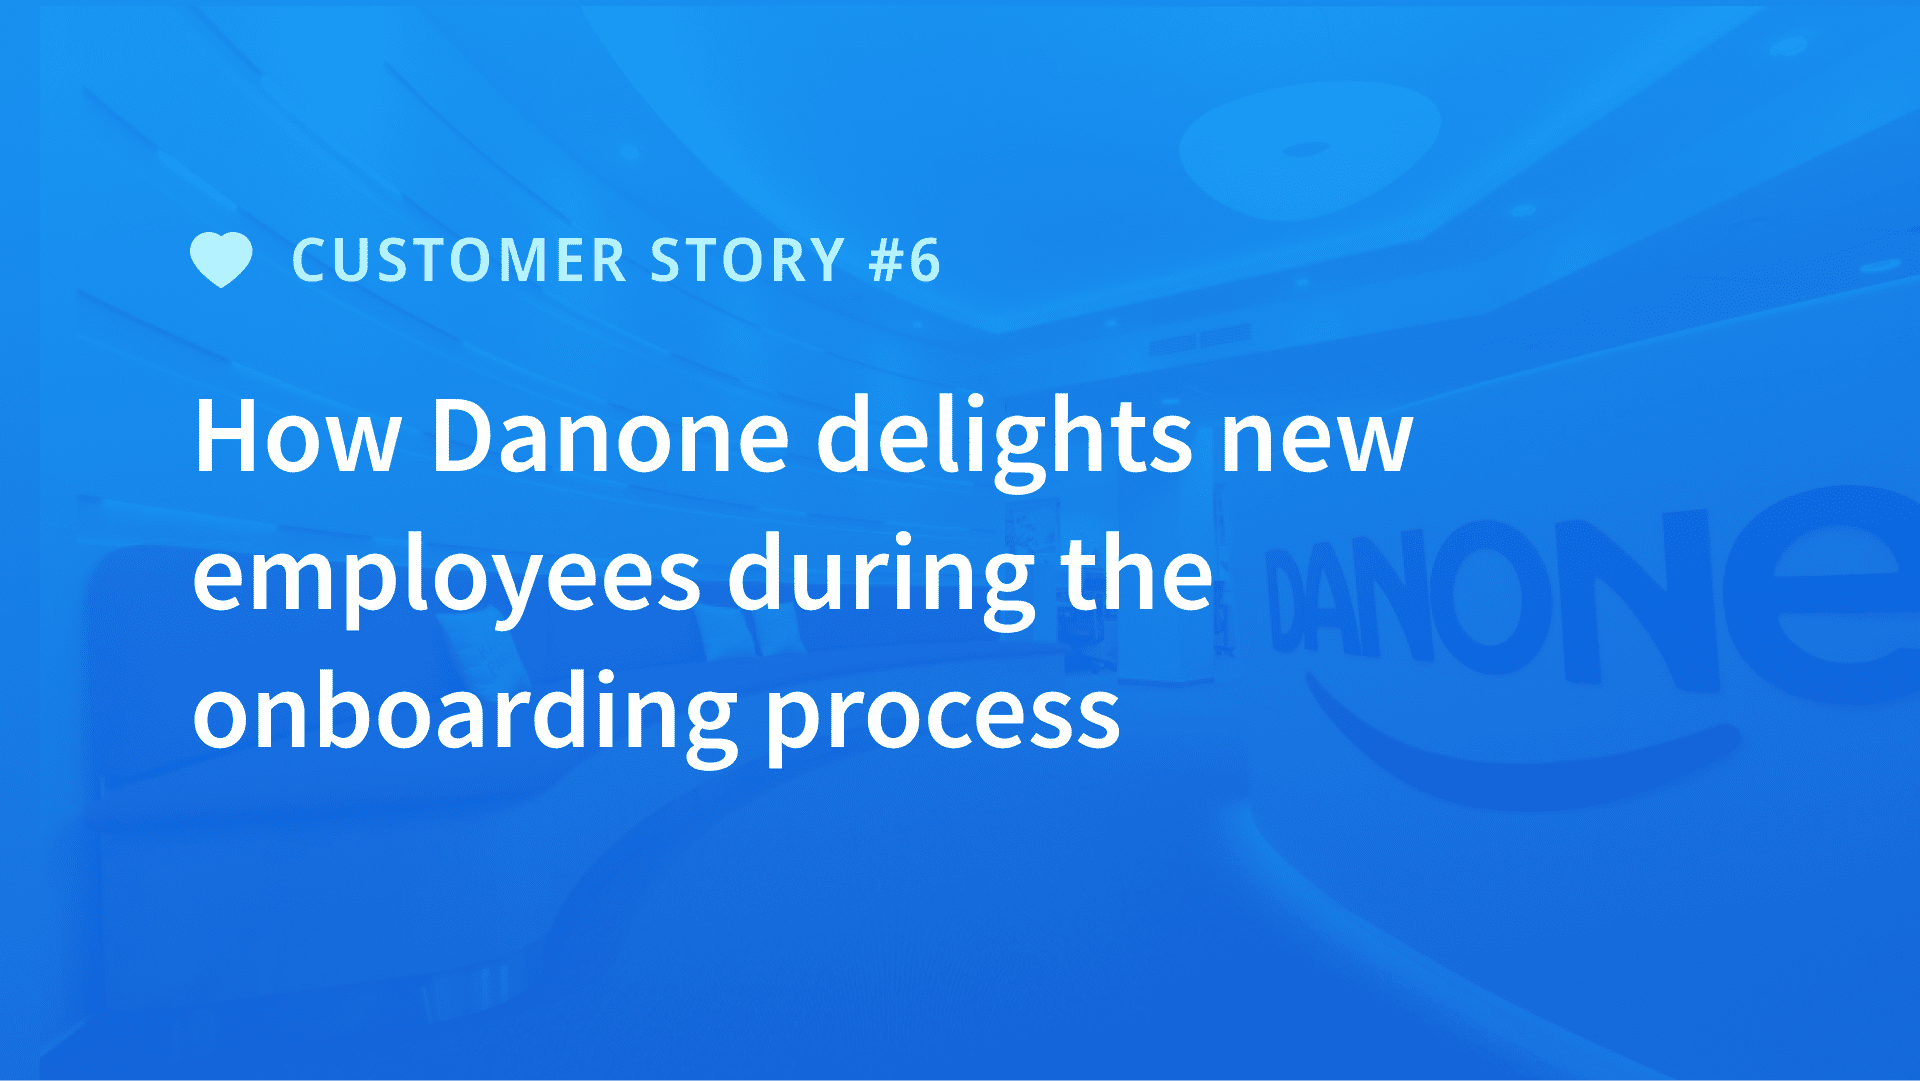 How Danone delights new employees during the onboarding process